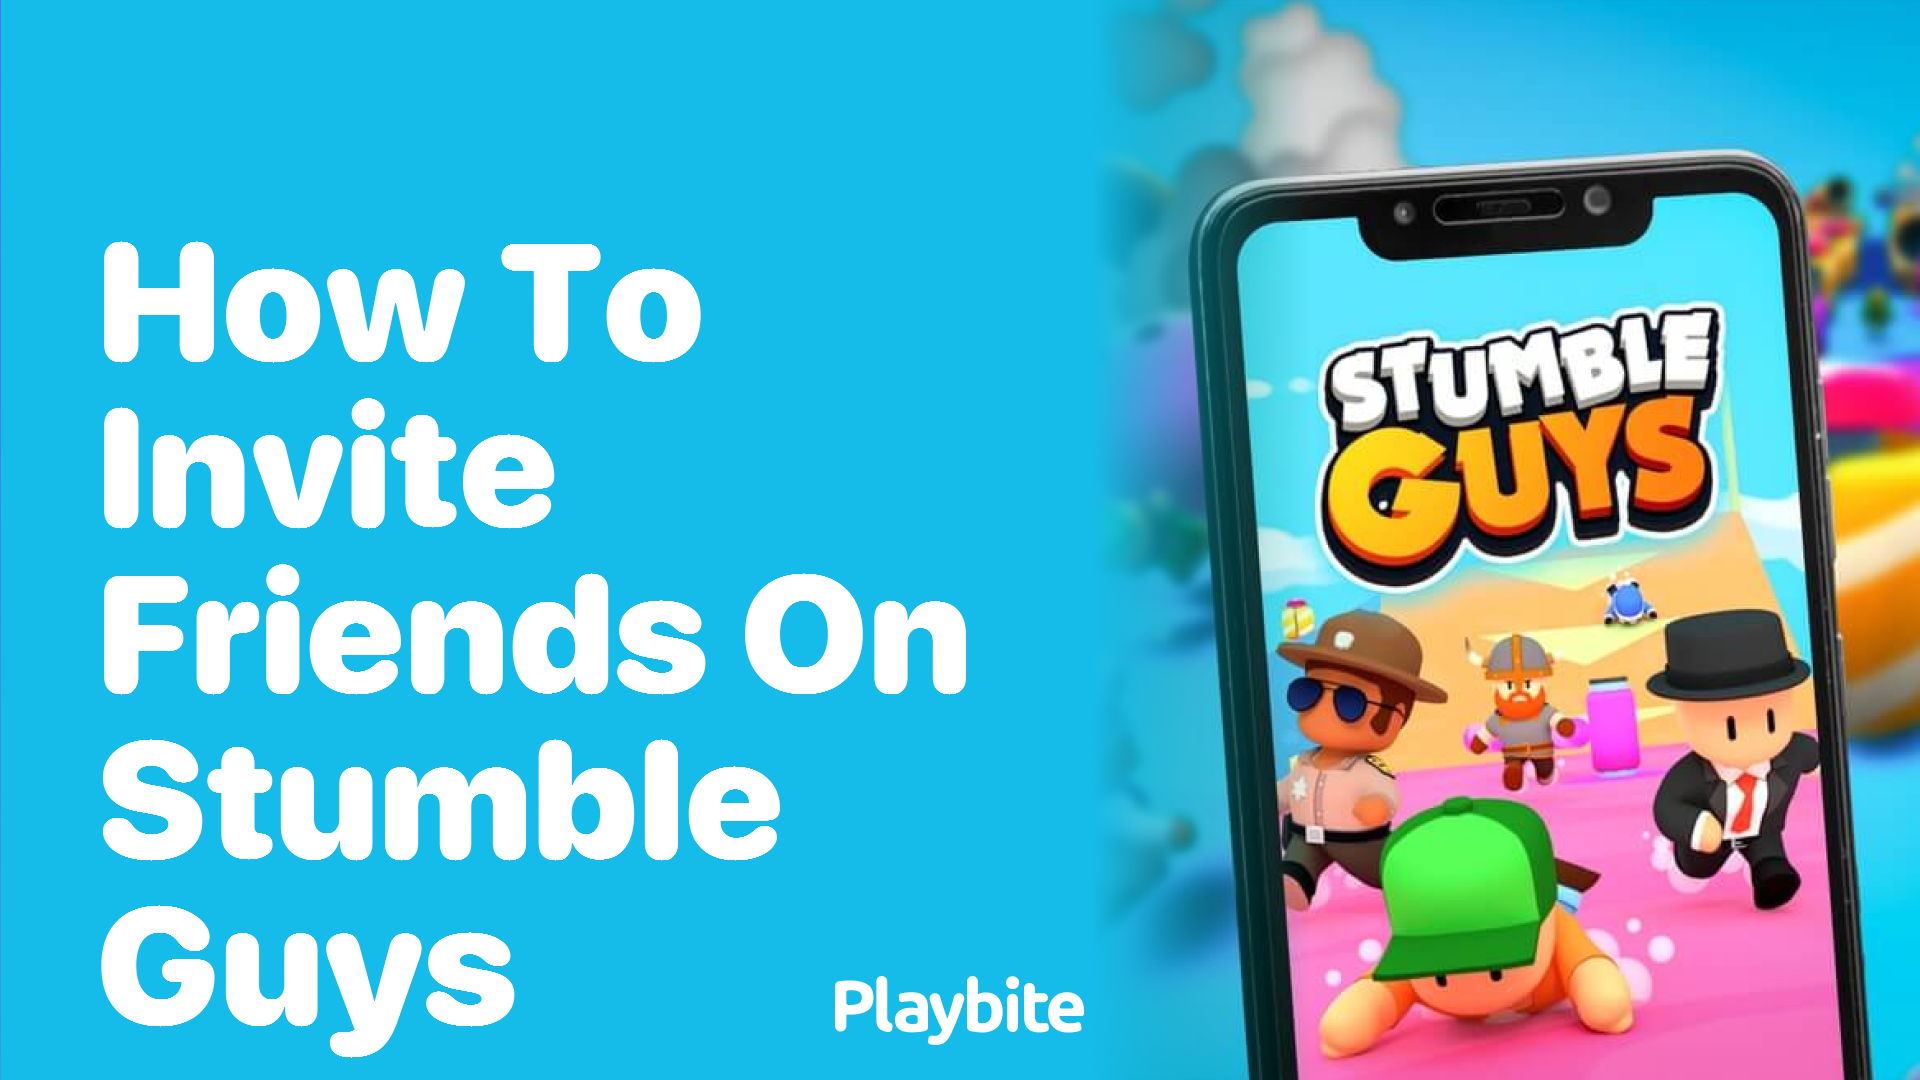 How to Invite Friends on Stumble Guys: A Simple Guide